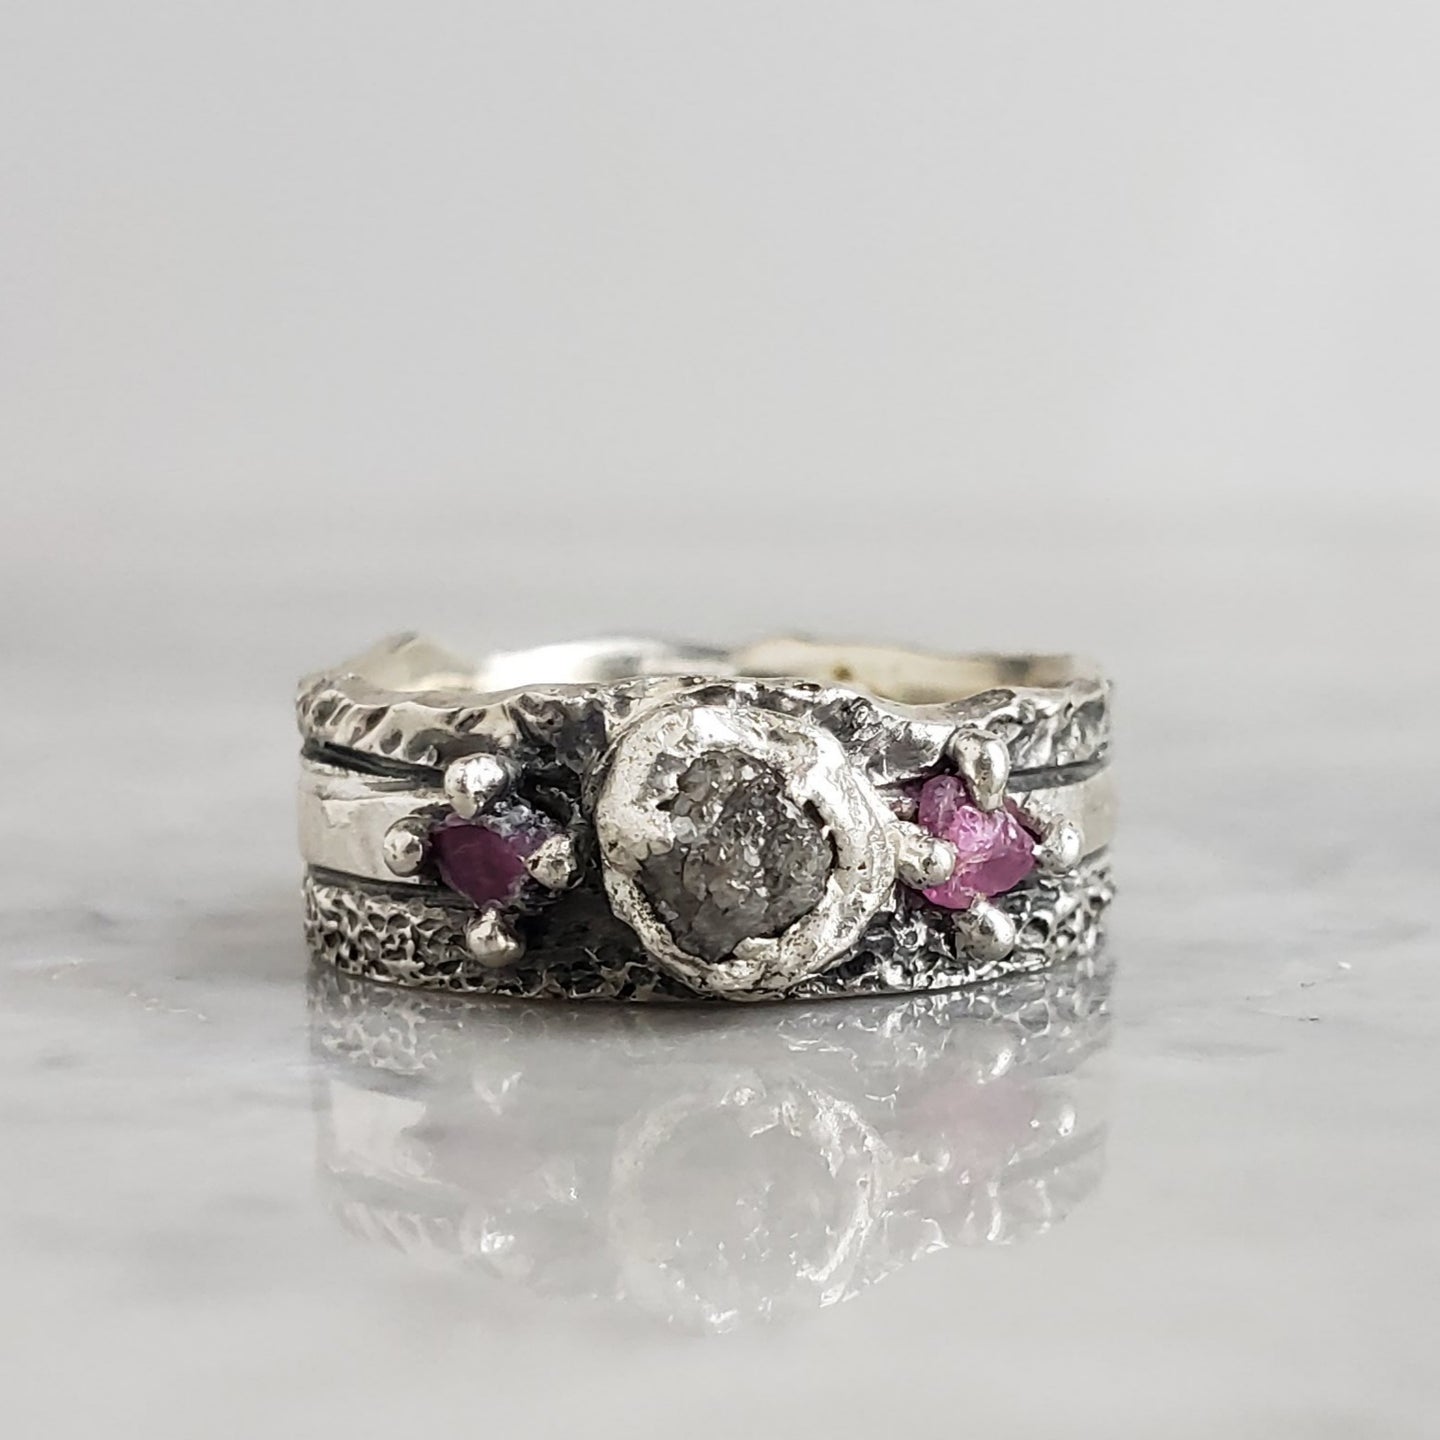 Rough Diamond and Ruby Ring, Silver